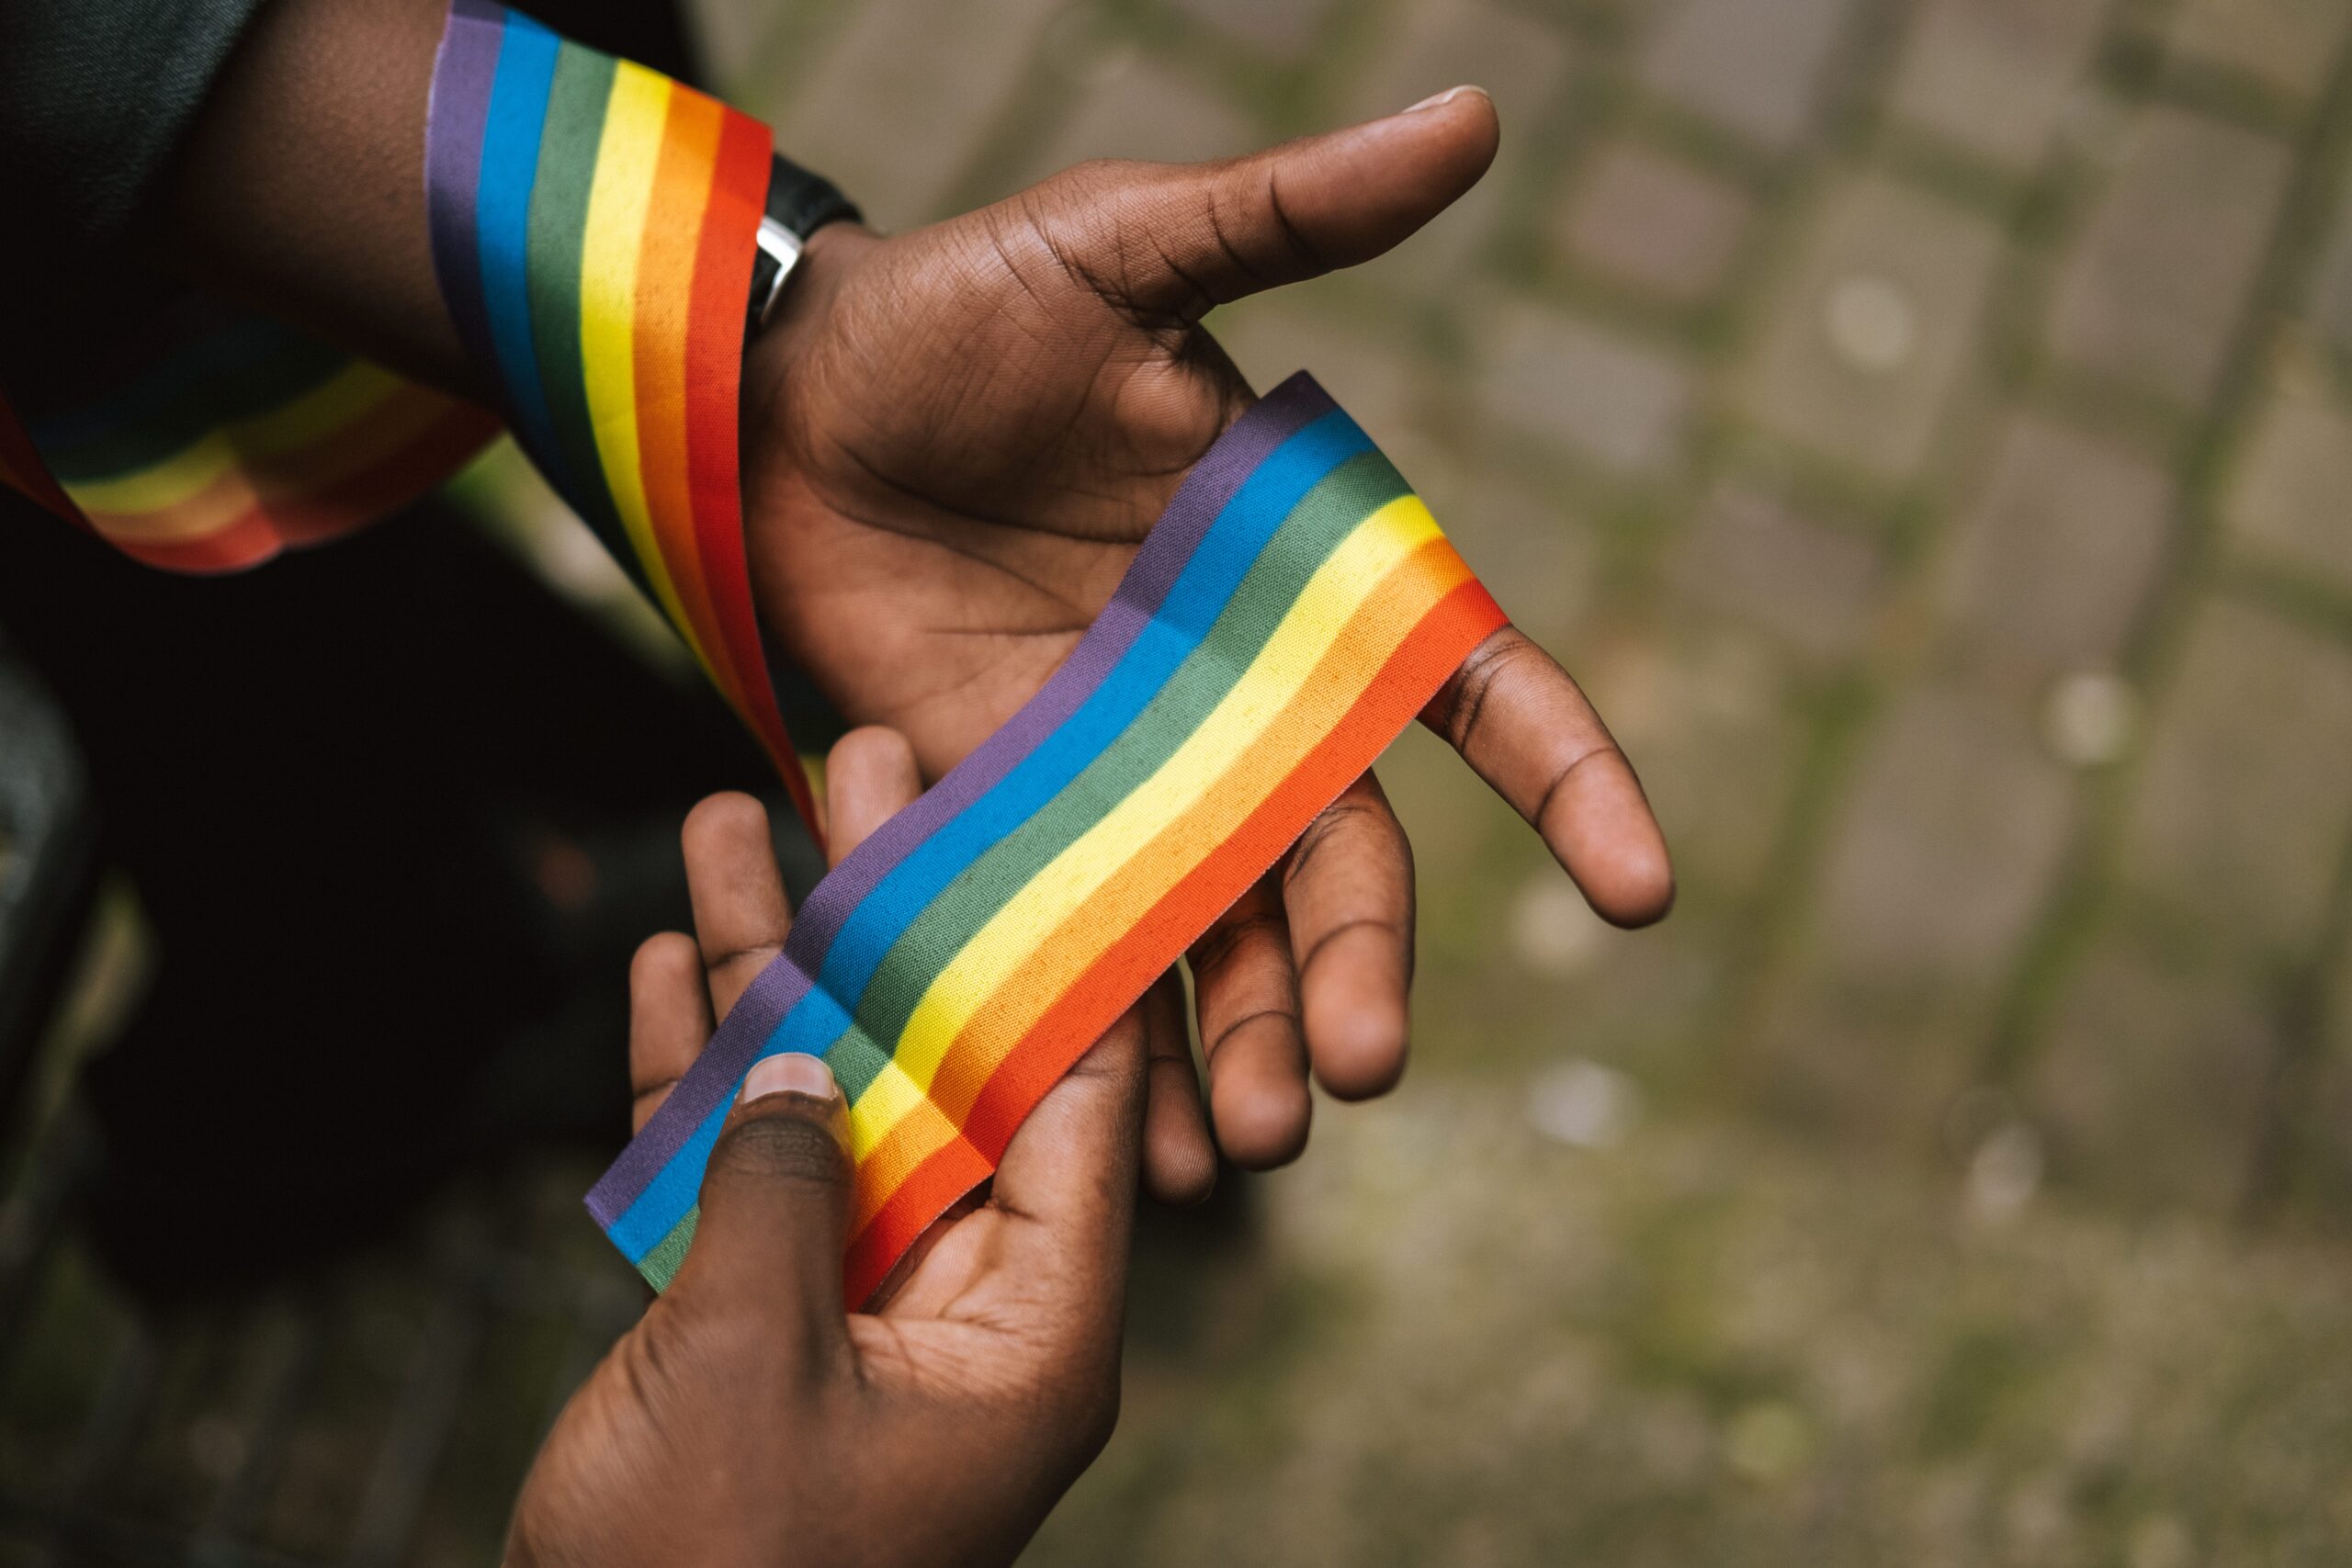 A Black man holds a rainbow ribbon in his hands. His face is not shown,